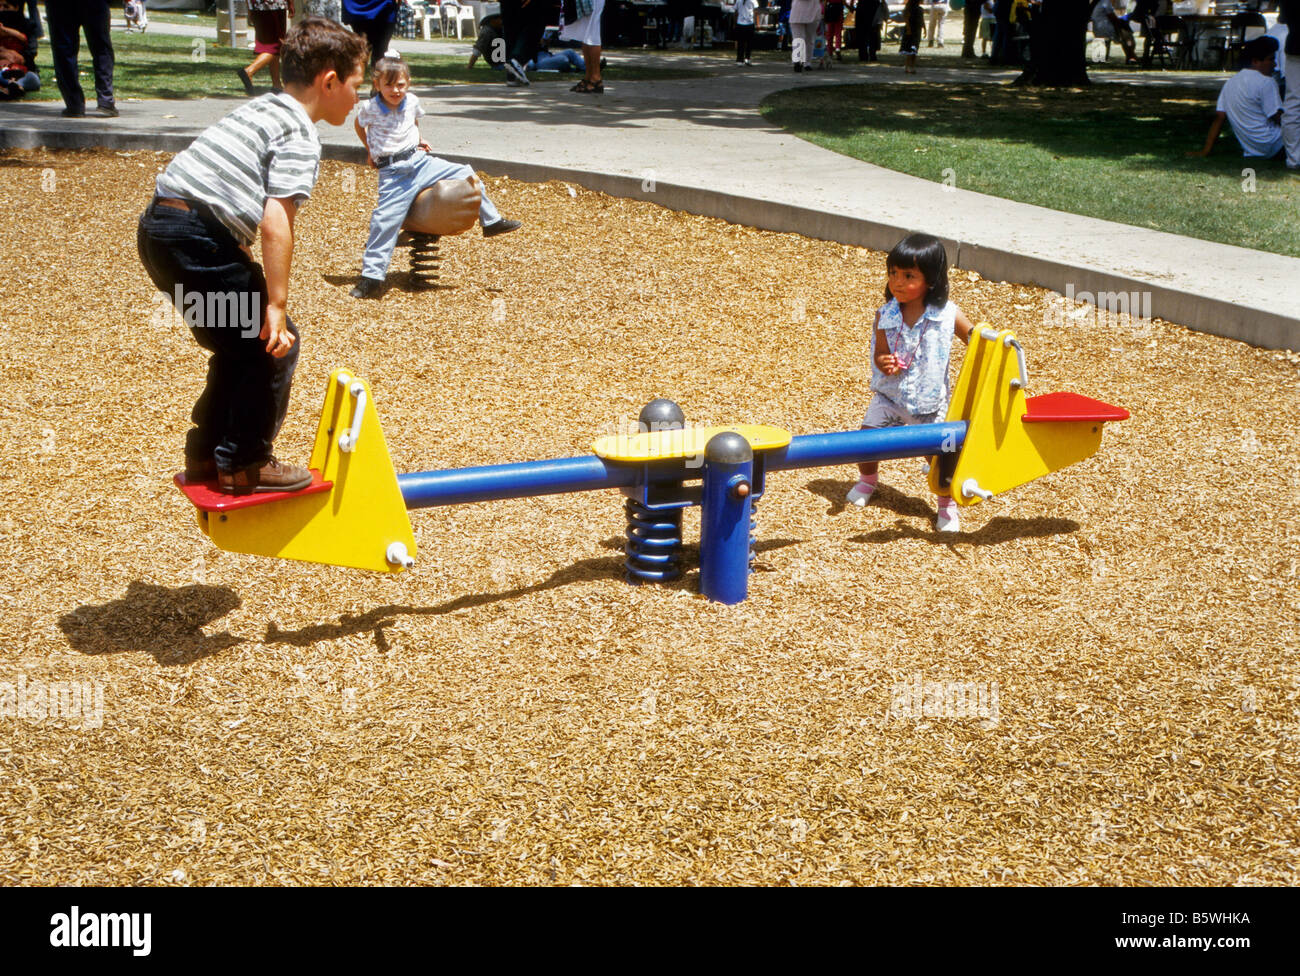 Children play on safety version of teeter-totter in park playground Stock Photo